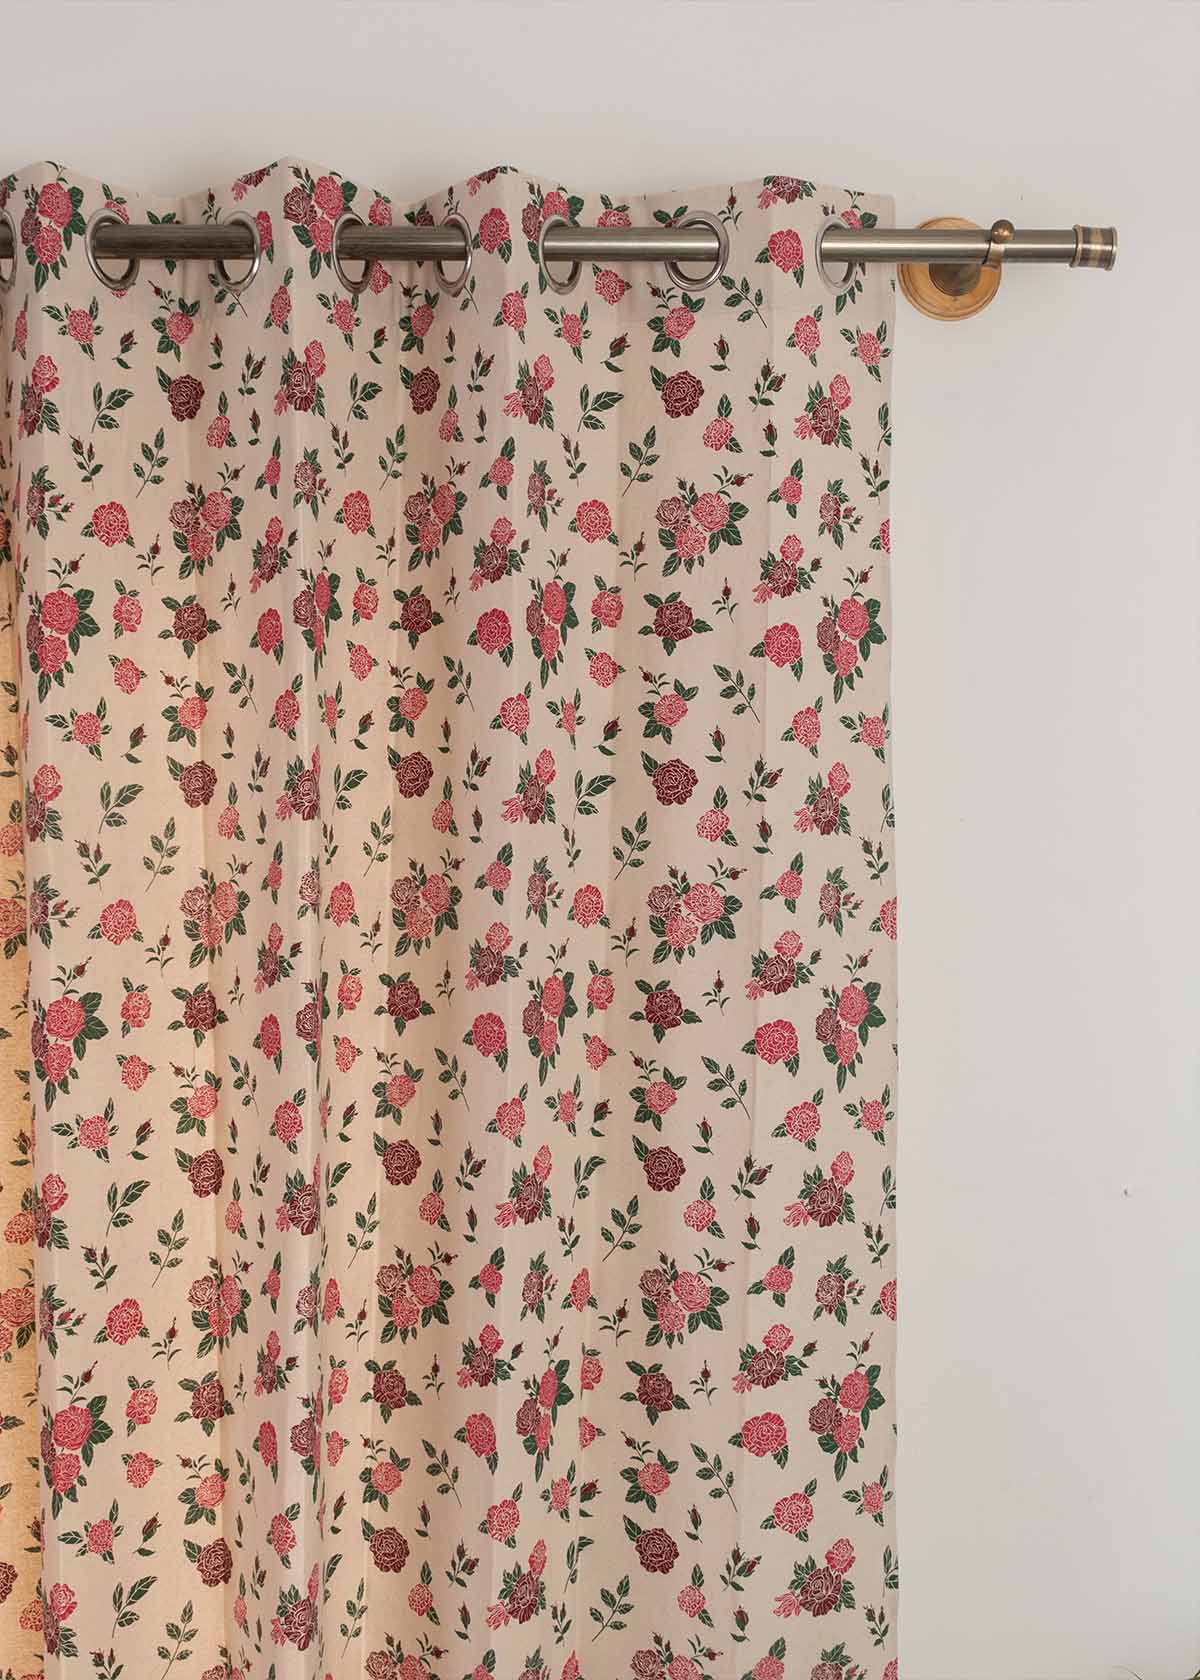 Wild Roses 100% cotton floral curtain for Living room & bed room - Room darkening - Pack of 1